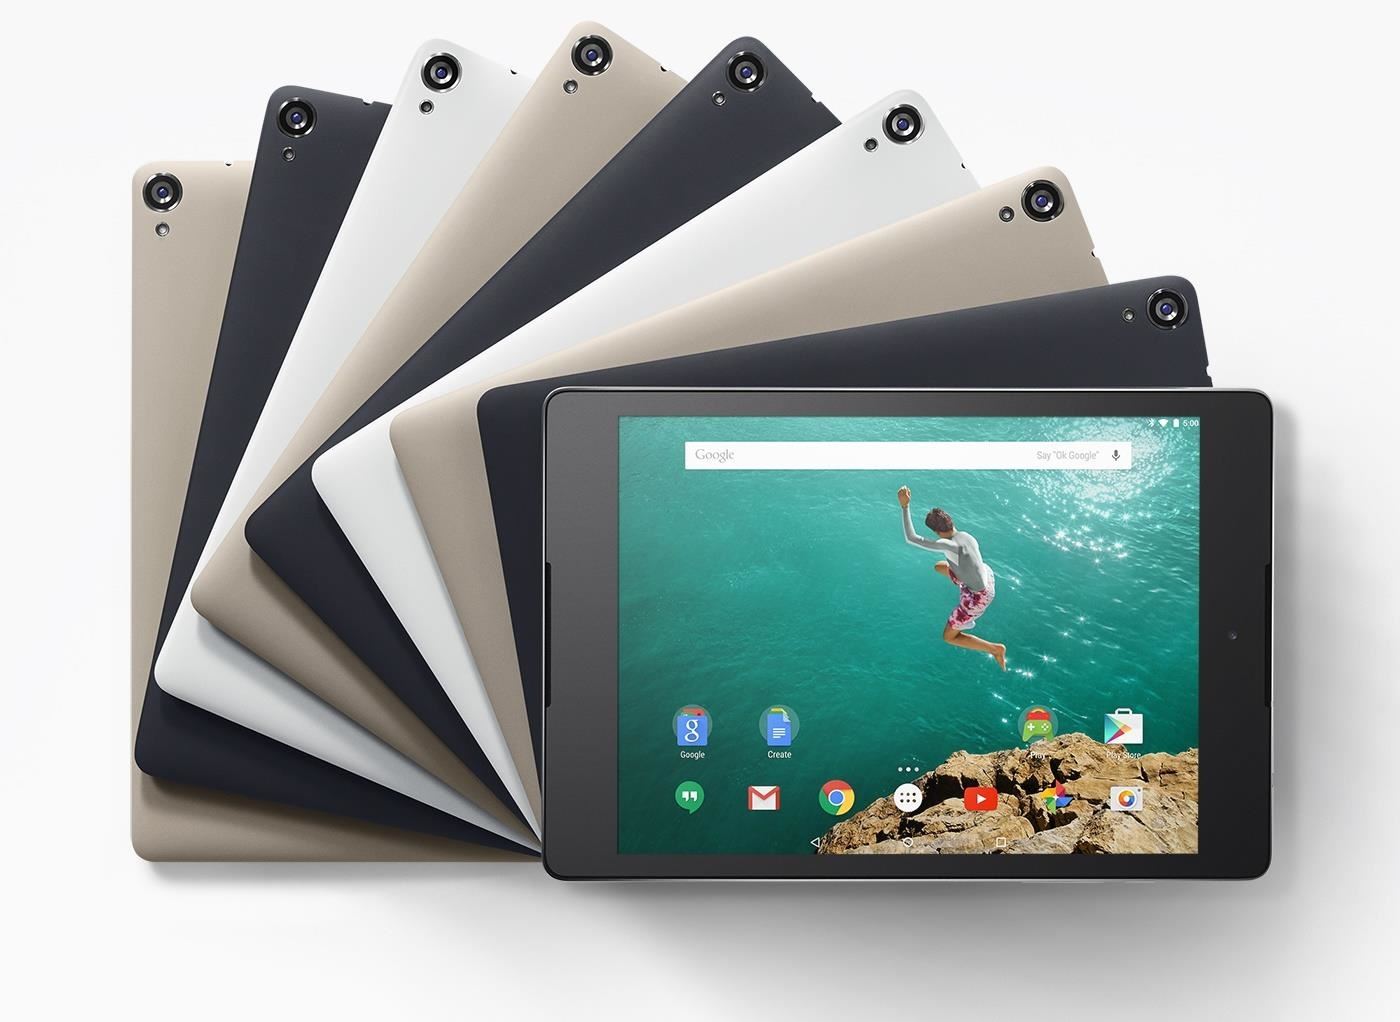 How to Pre-Order the Nexus 9 a Day Before Google Will Let You